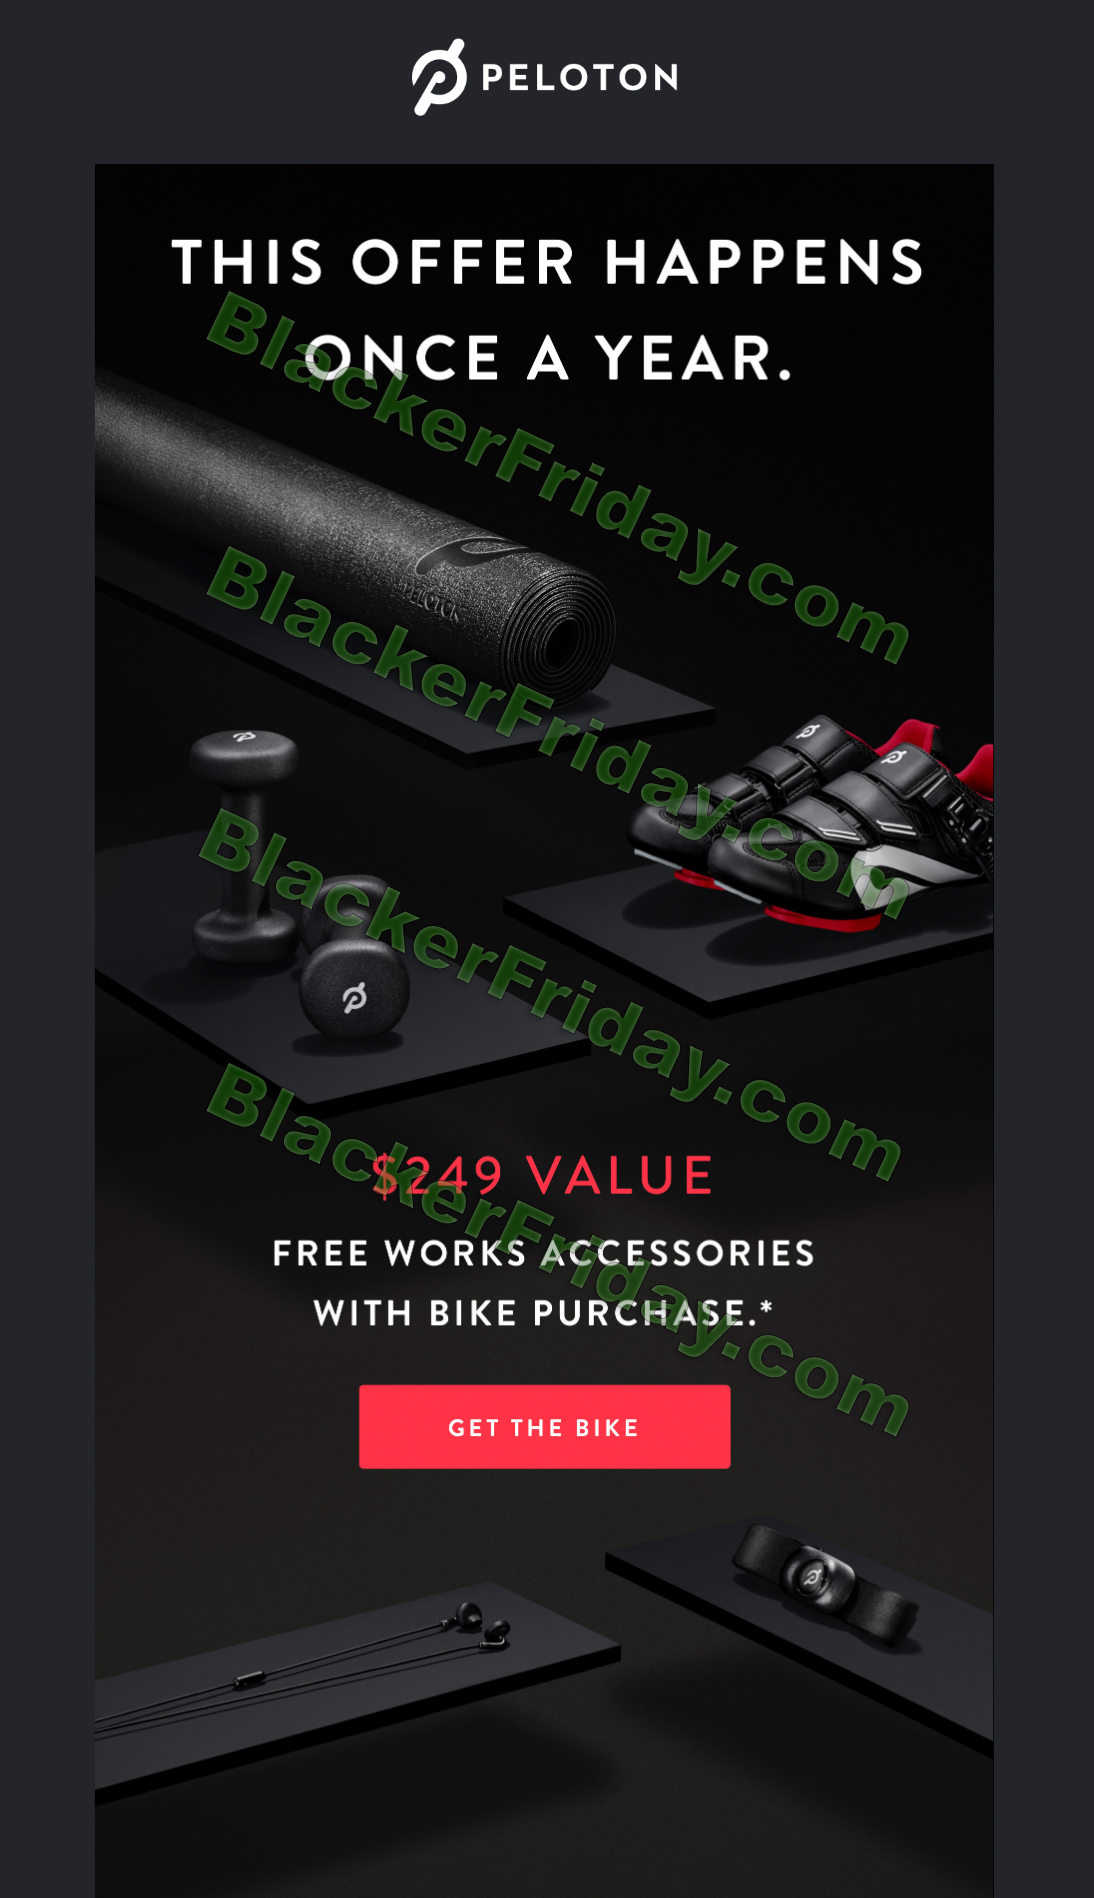 Peloton Black Friday 2020 Sale - What to Expect - Blacker Friday